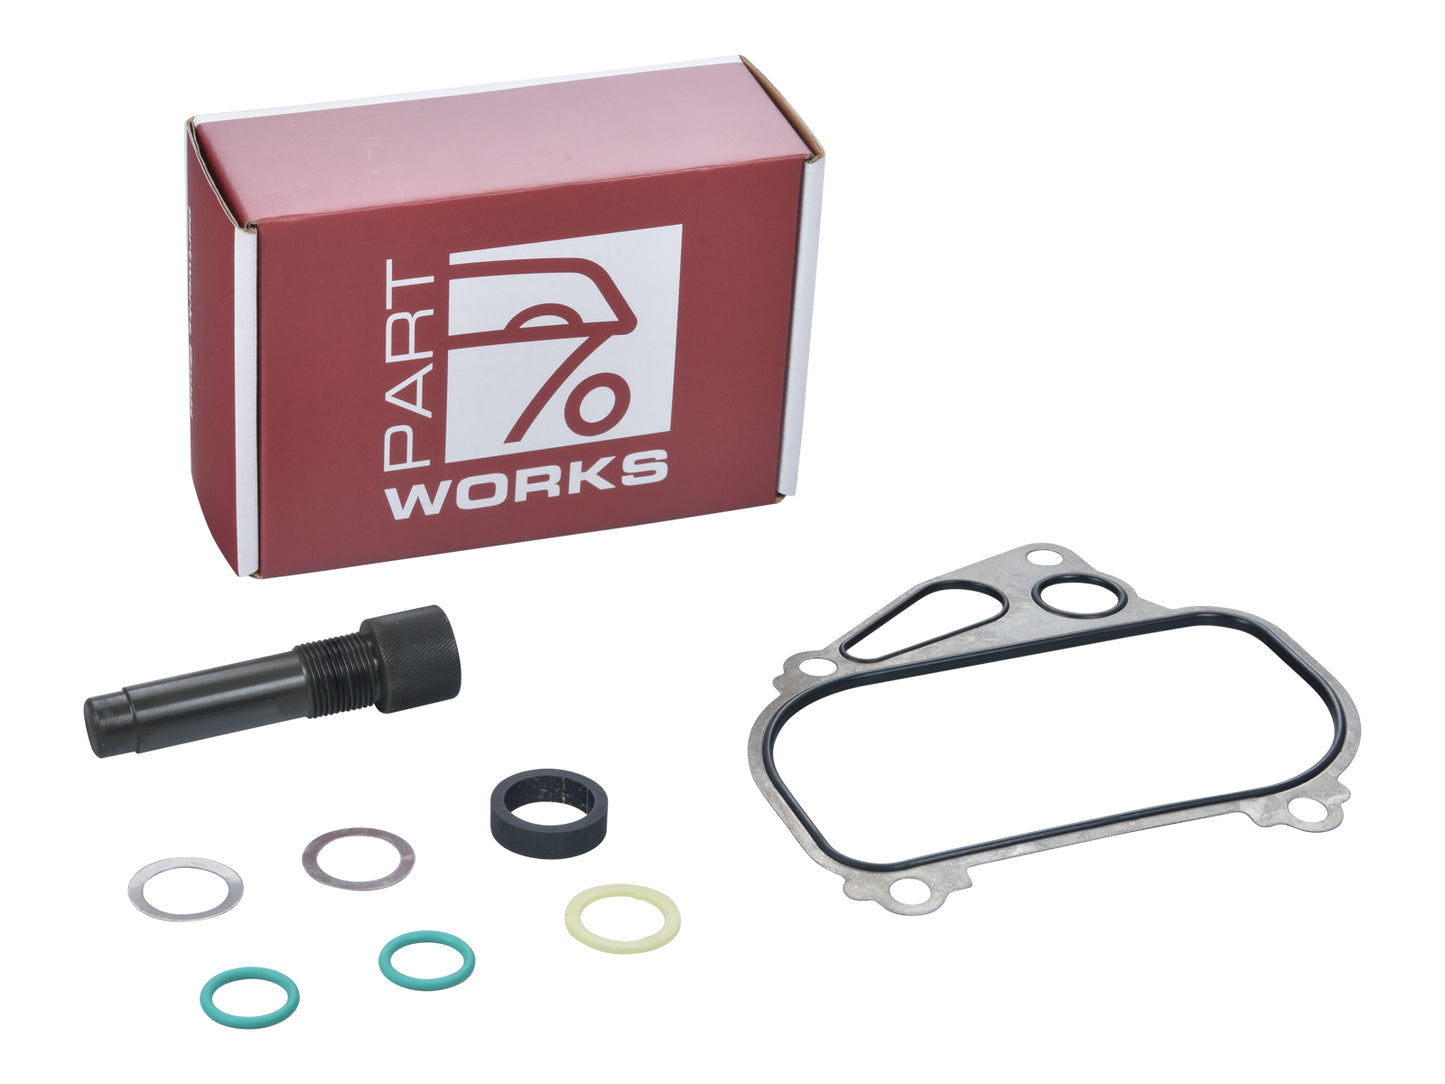 Gasket set with tool for Porsche 944 968 from '86- heat exchanger